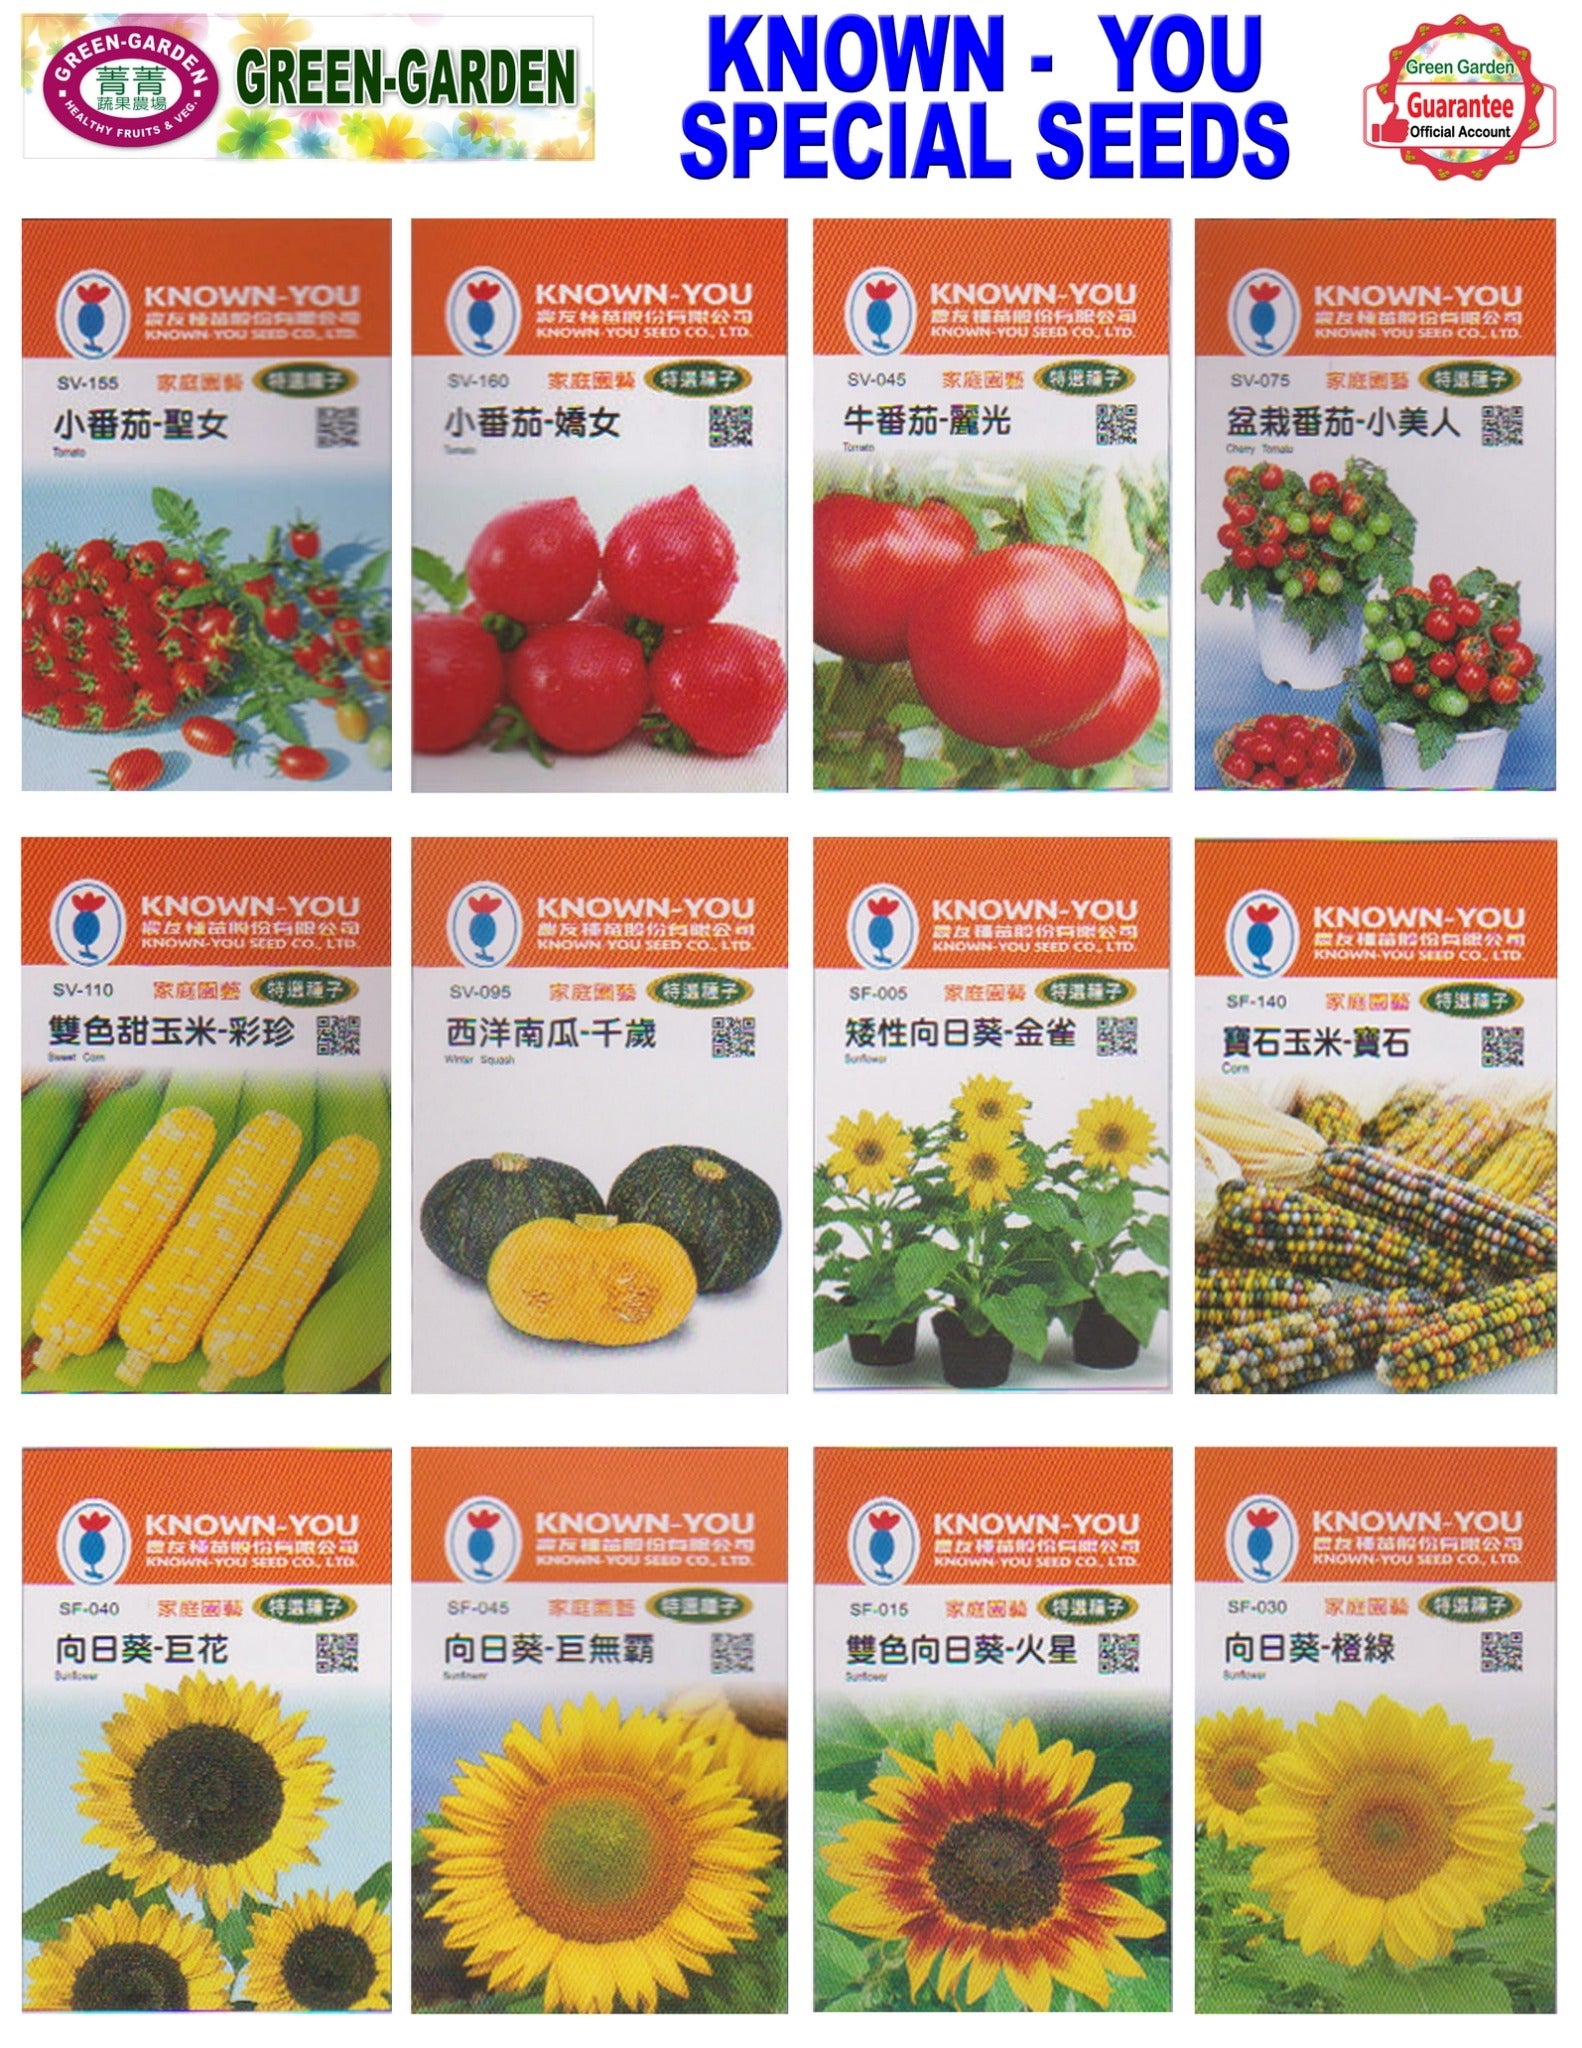 Known You Special Seeds (SV-075 Cherry Tomato)